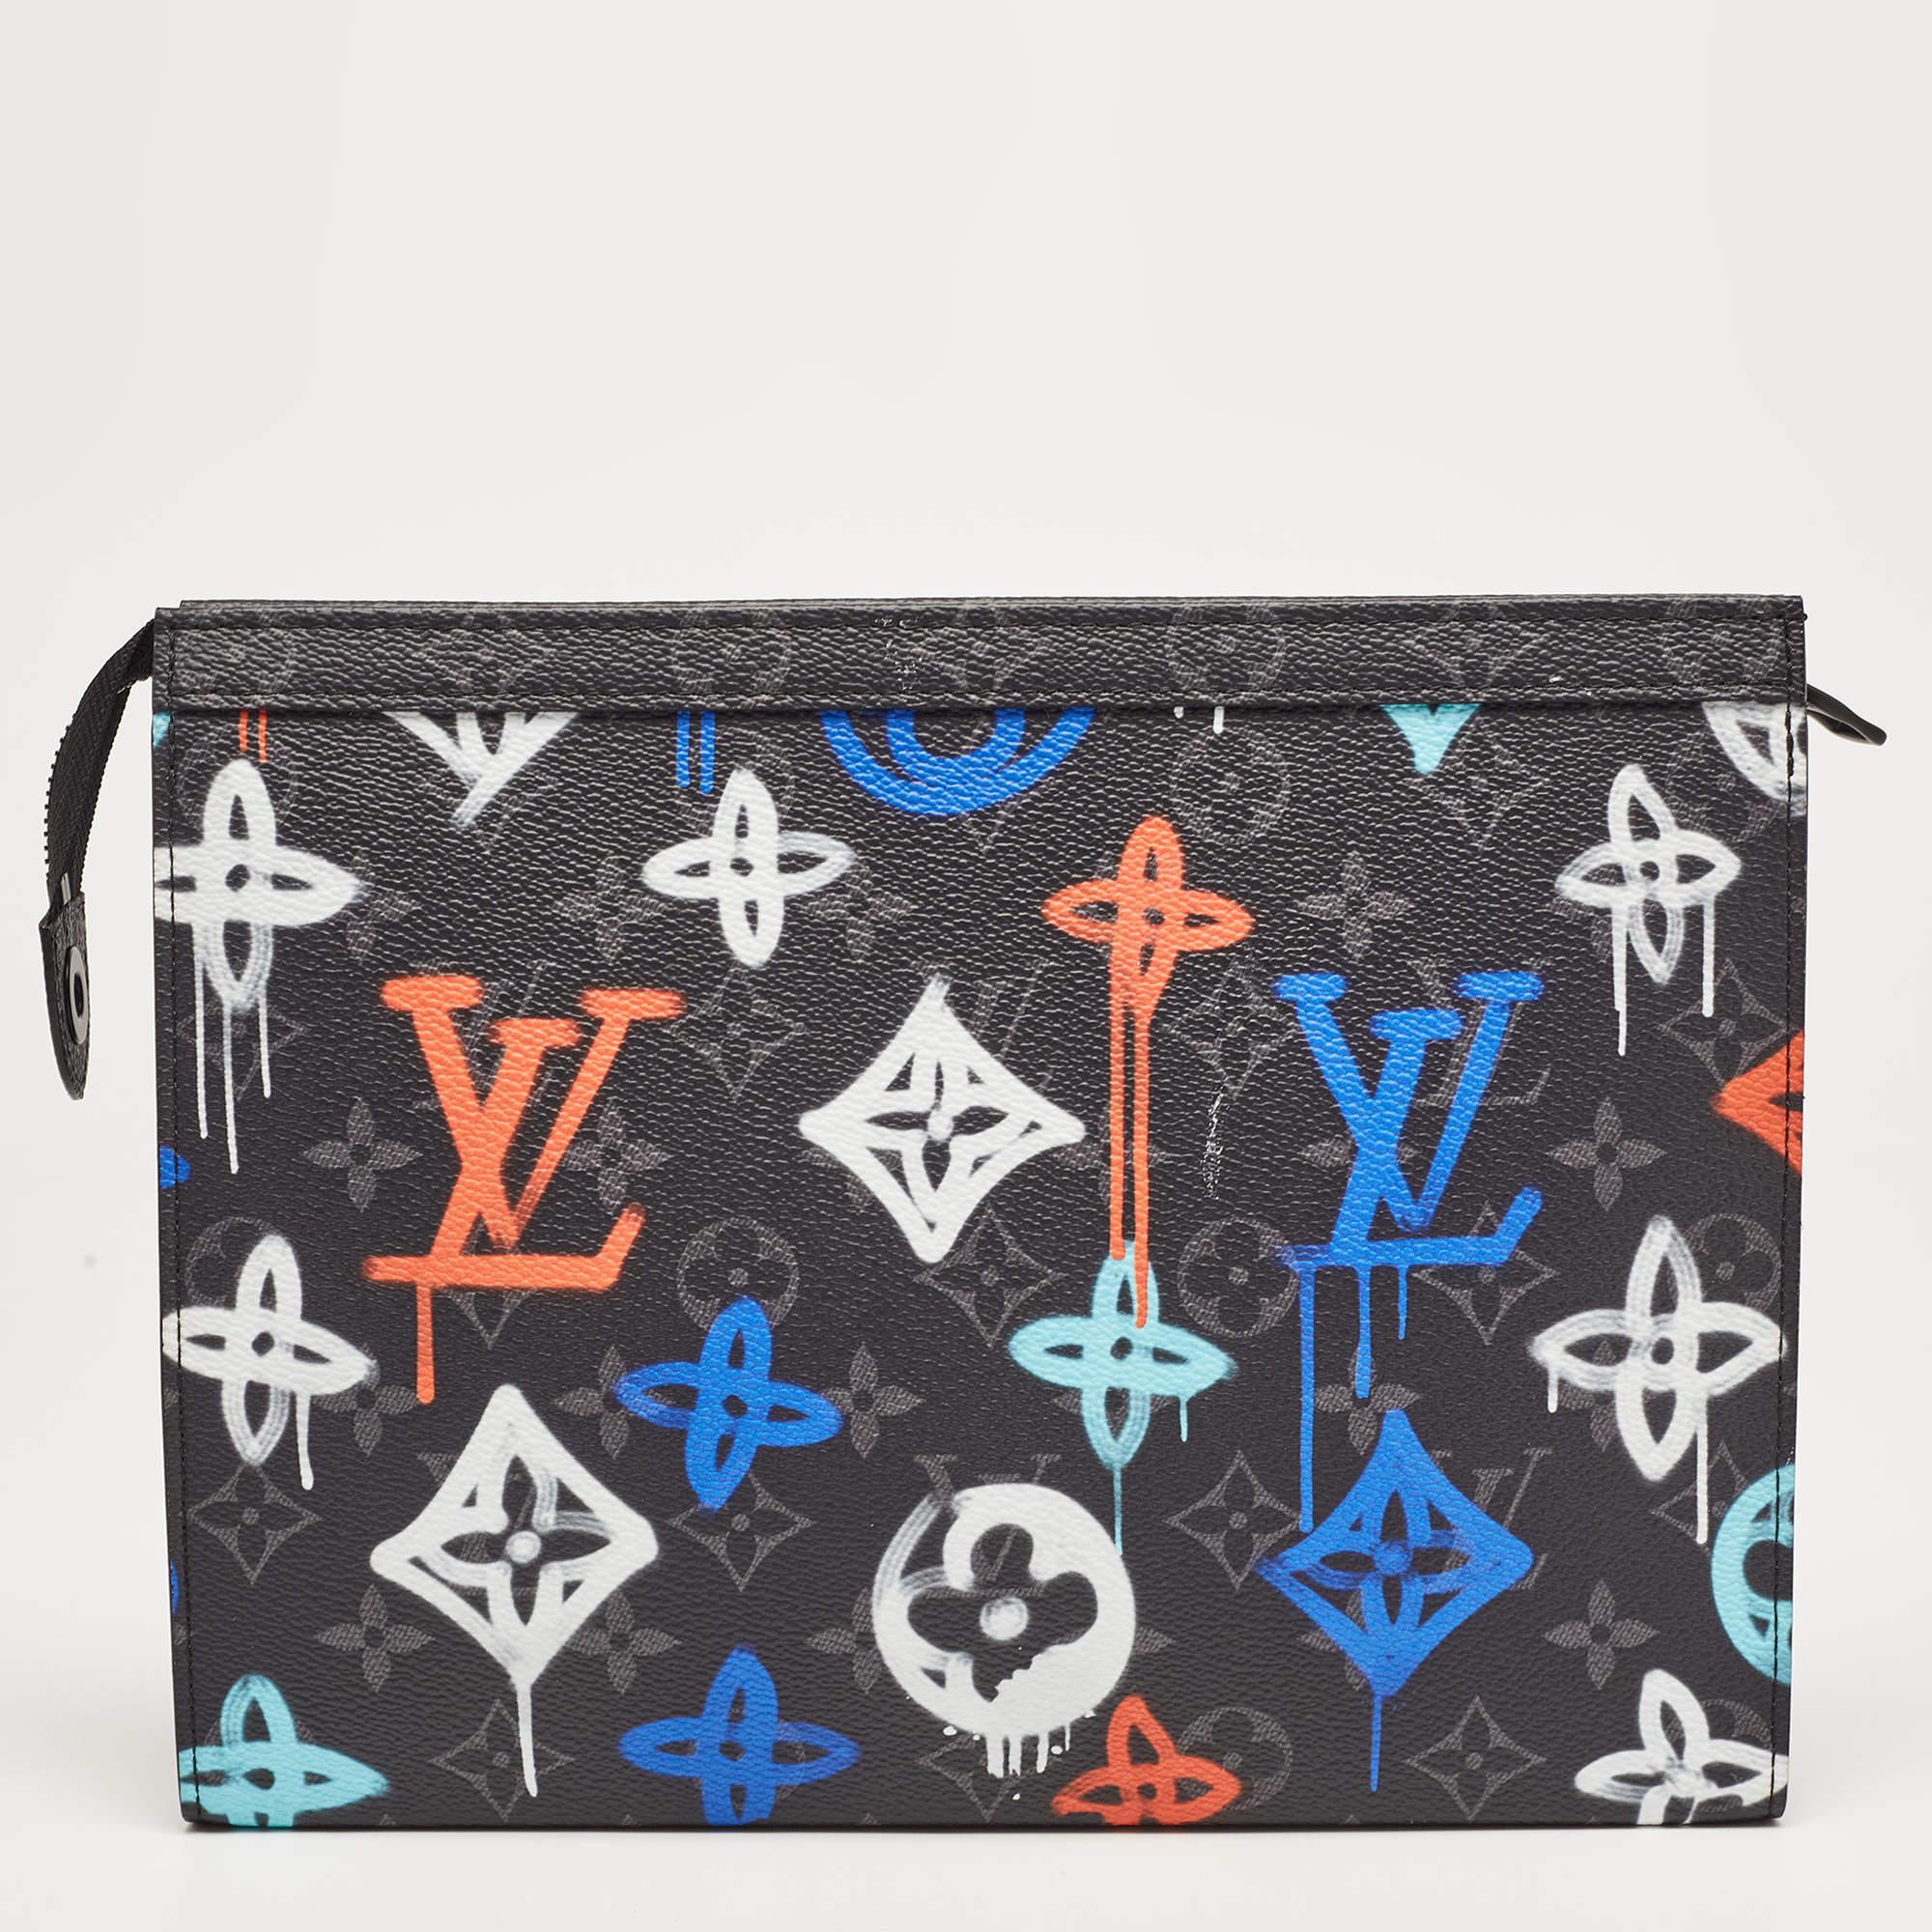 Indulge in luxury with this LV Pochette Voyage MM. Meticulously crafted from premium materials, it combines exquisite design, impeccable craftsmanship, and timeless elegance. Elevate your style with this fashion accessory.

